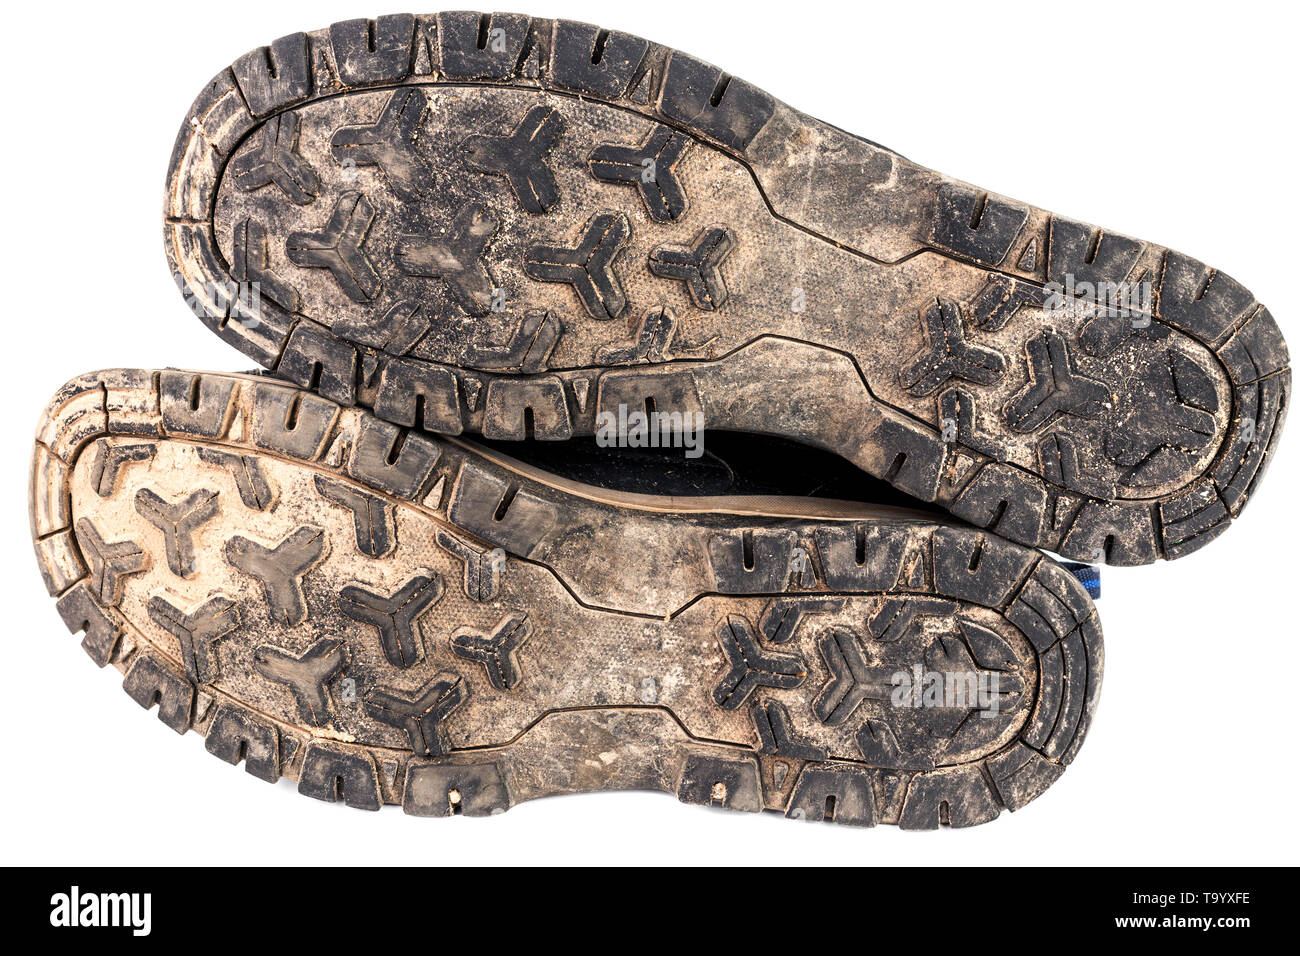 Dirty and Dusty Used Sneaker Shoe Sole, the Bottom Part Stock Photo - Image  of design, lace: 164590856